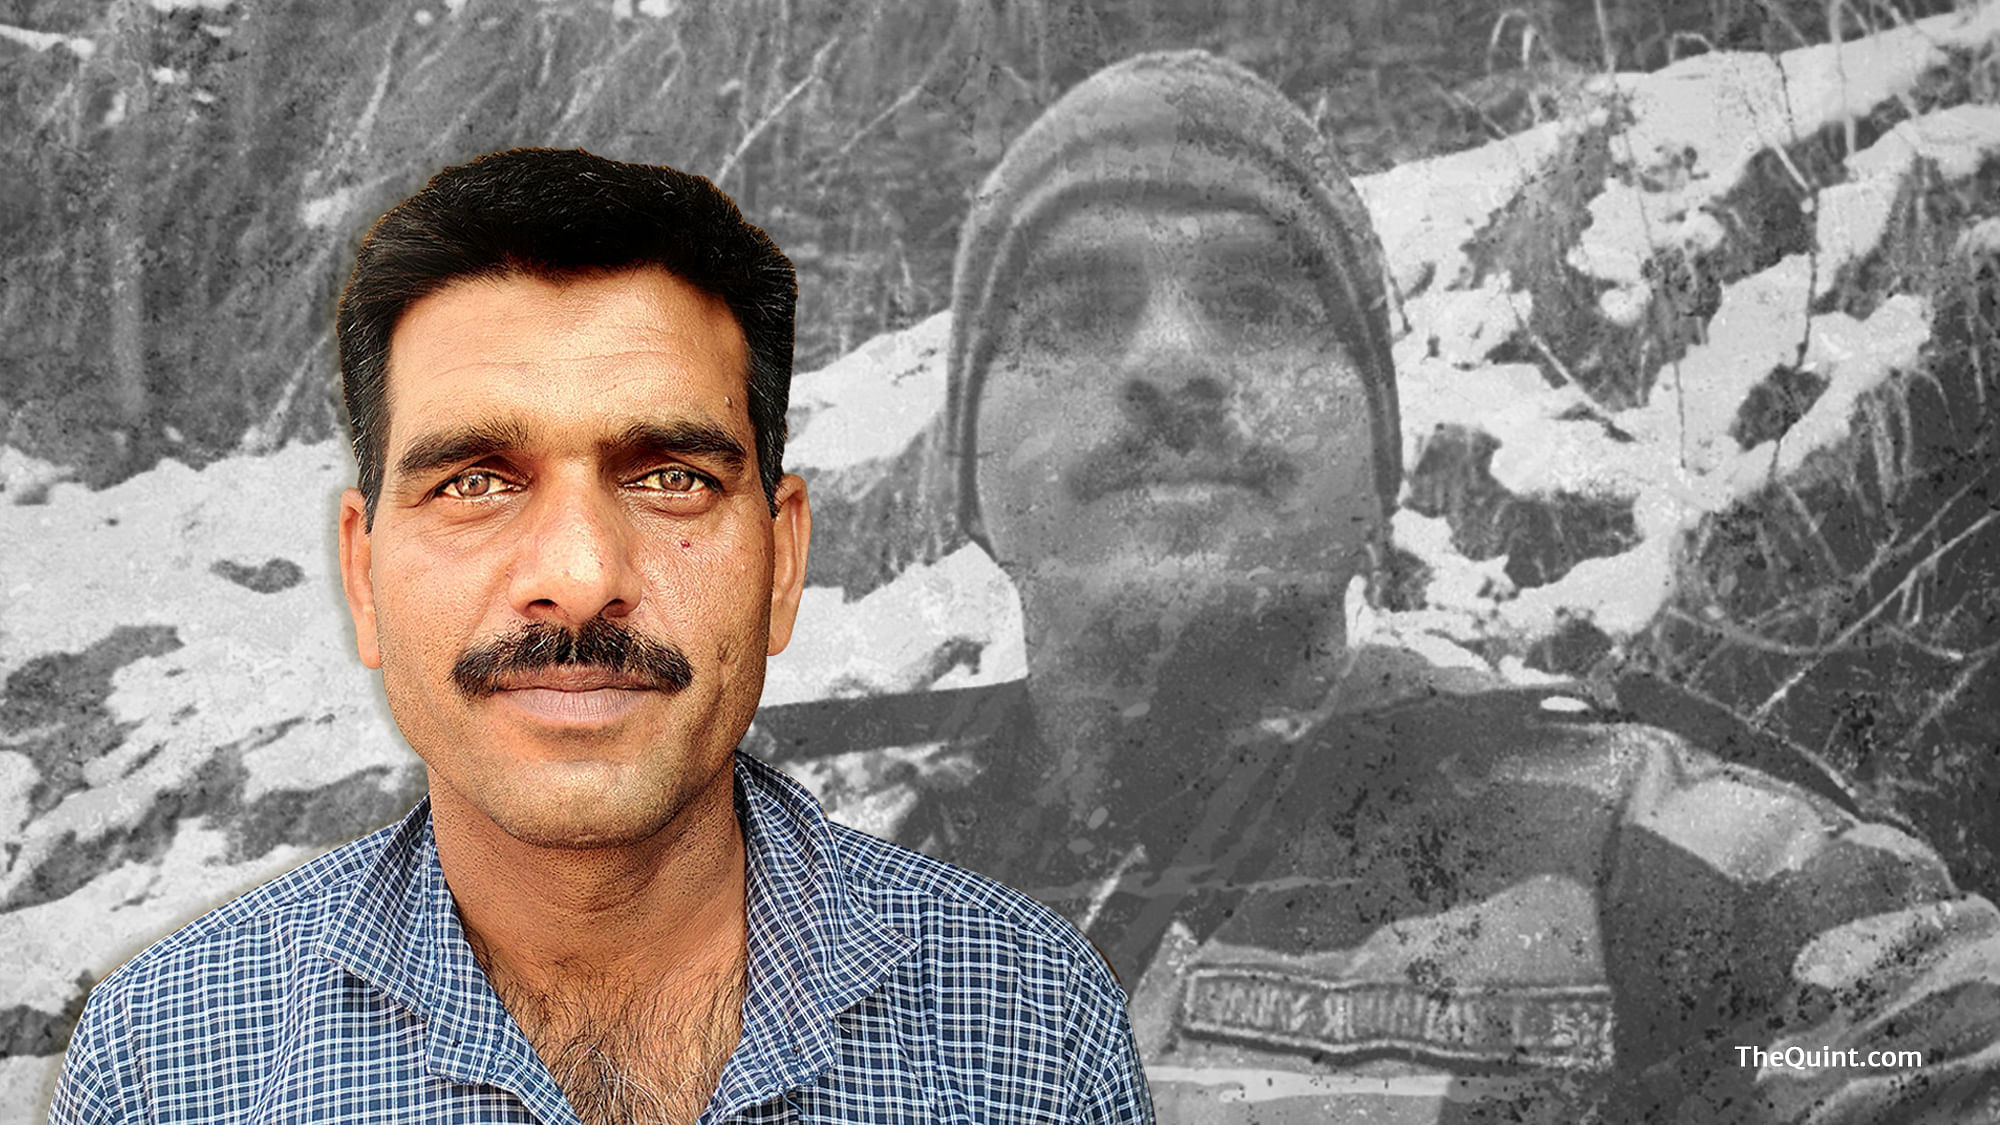 Ex-BSF Jawan Tej Bahadur says he ‘exposed’ the food scam to help other soldiers and to help the anti-corruption drive. (Photo: Liju Joseph/<b>The Quint</b>)